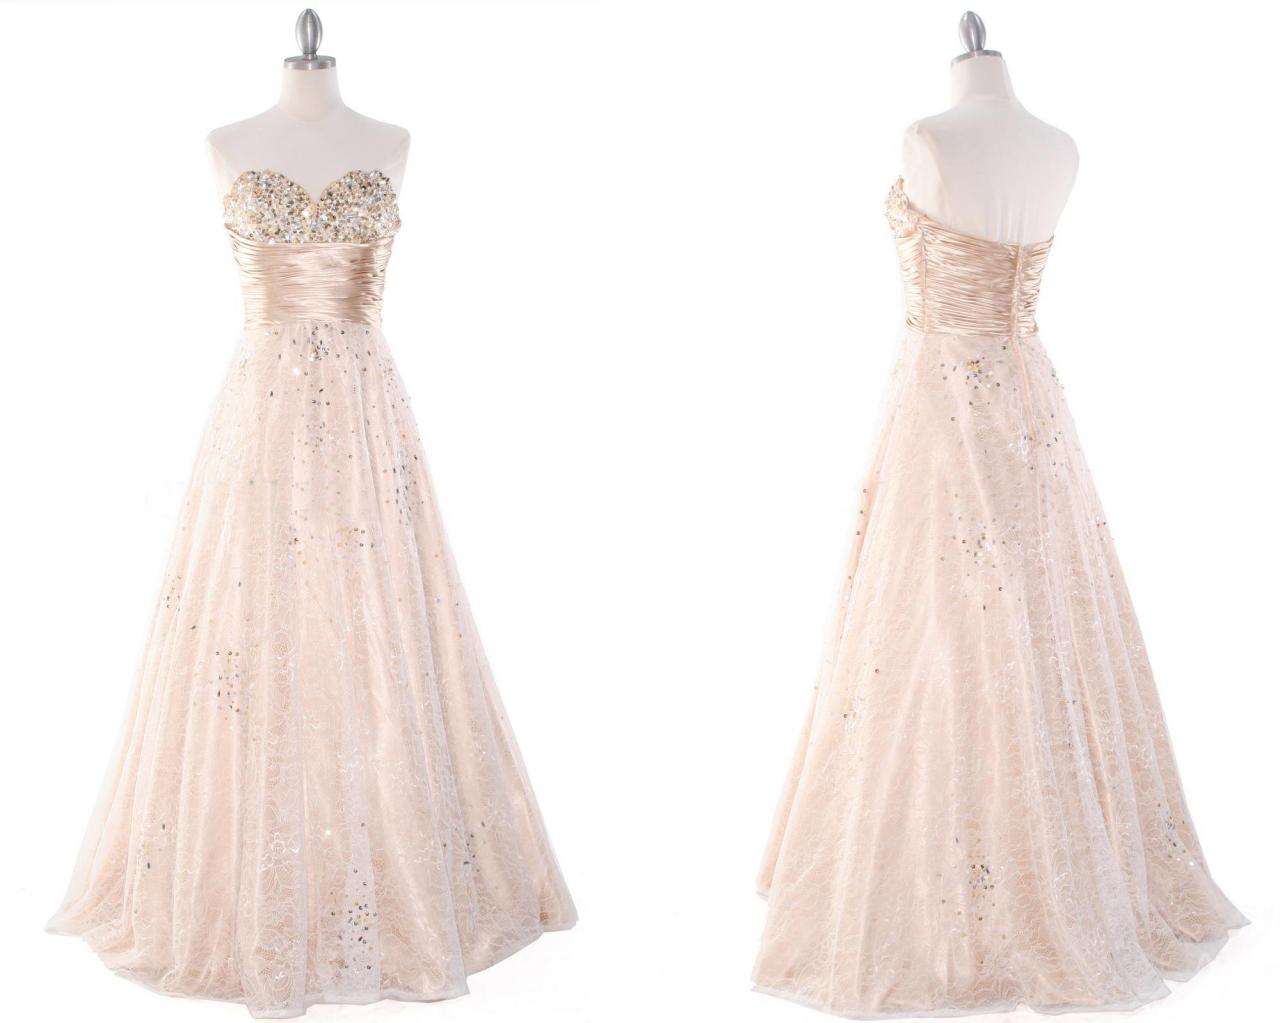 Champagne Lace Prom Dresses,strapless Long Sweetheart Beaded A-line Empire Waist Floor Length Evening Dress,party Dress,cocktail Dress